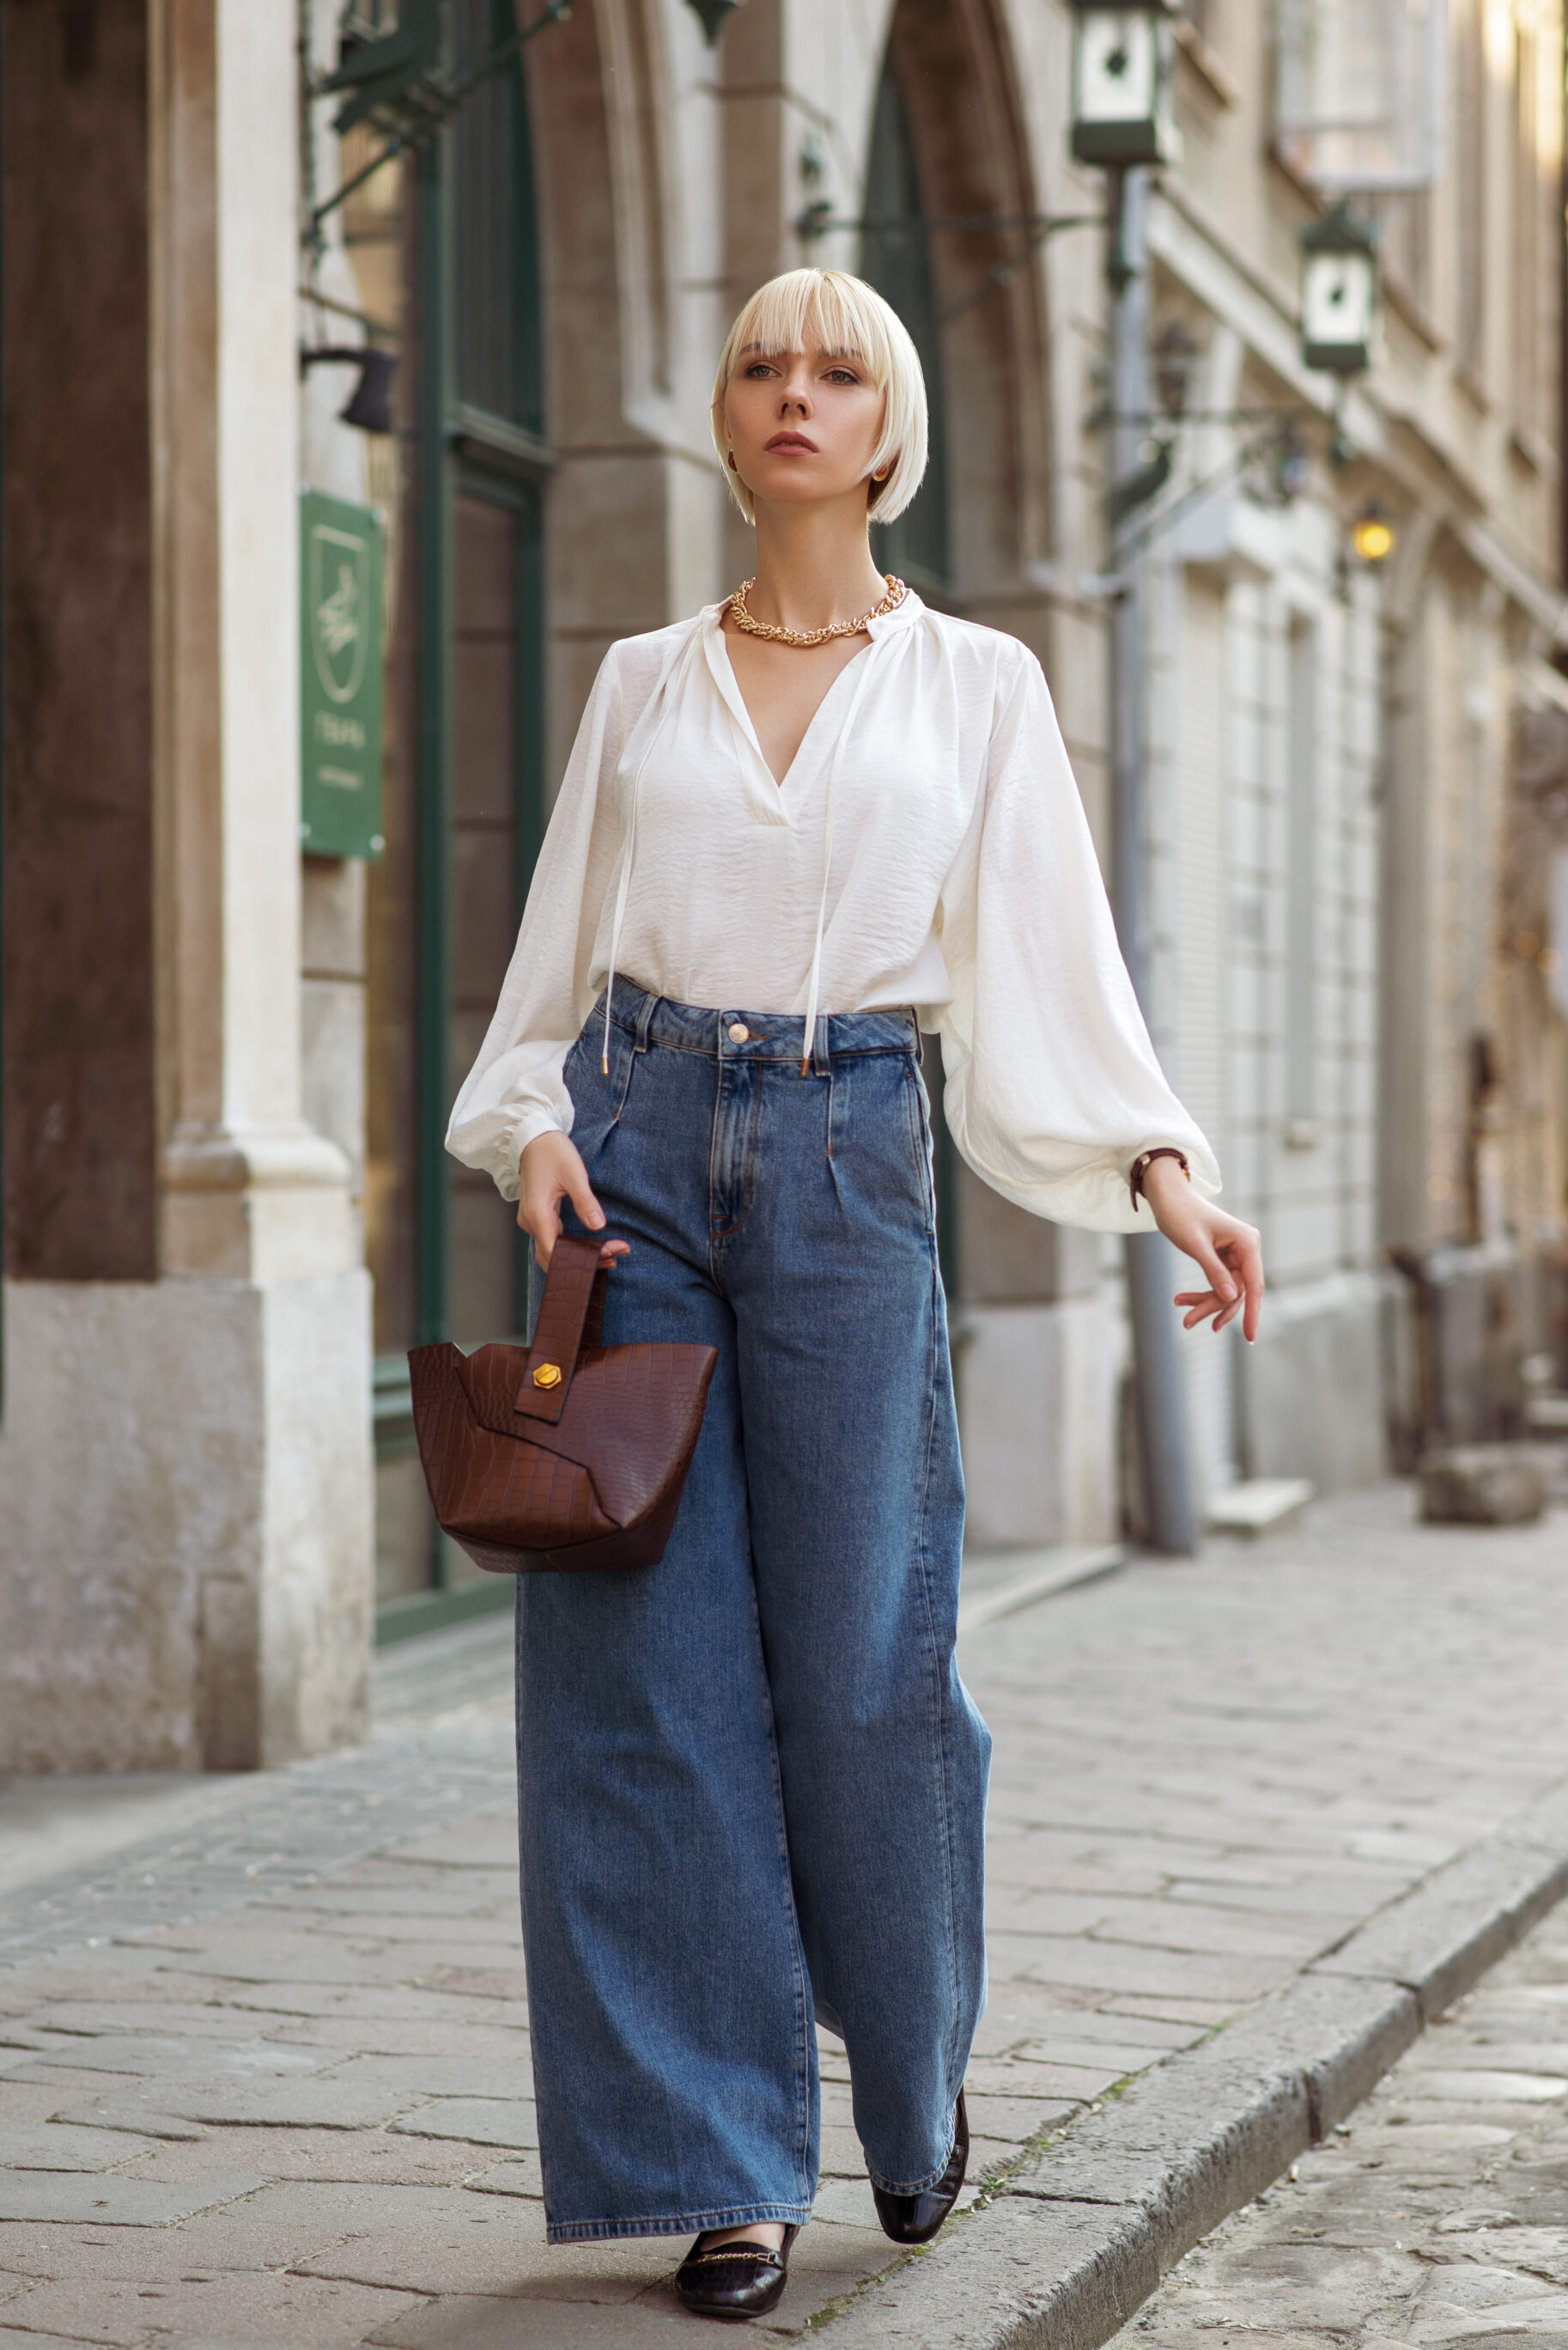 Wide Leg Jeans with a White Blouse